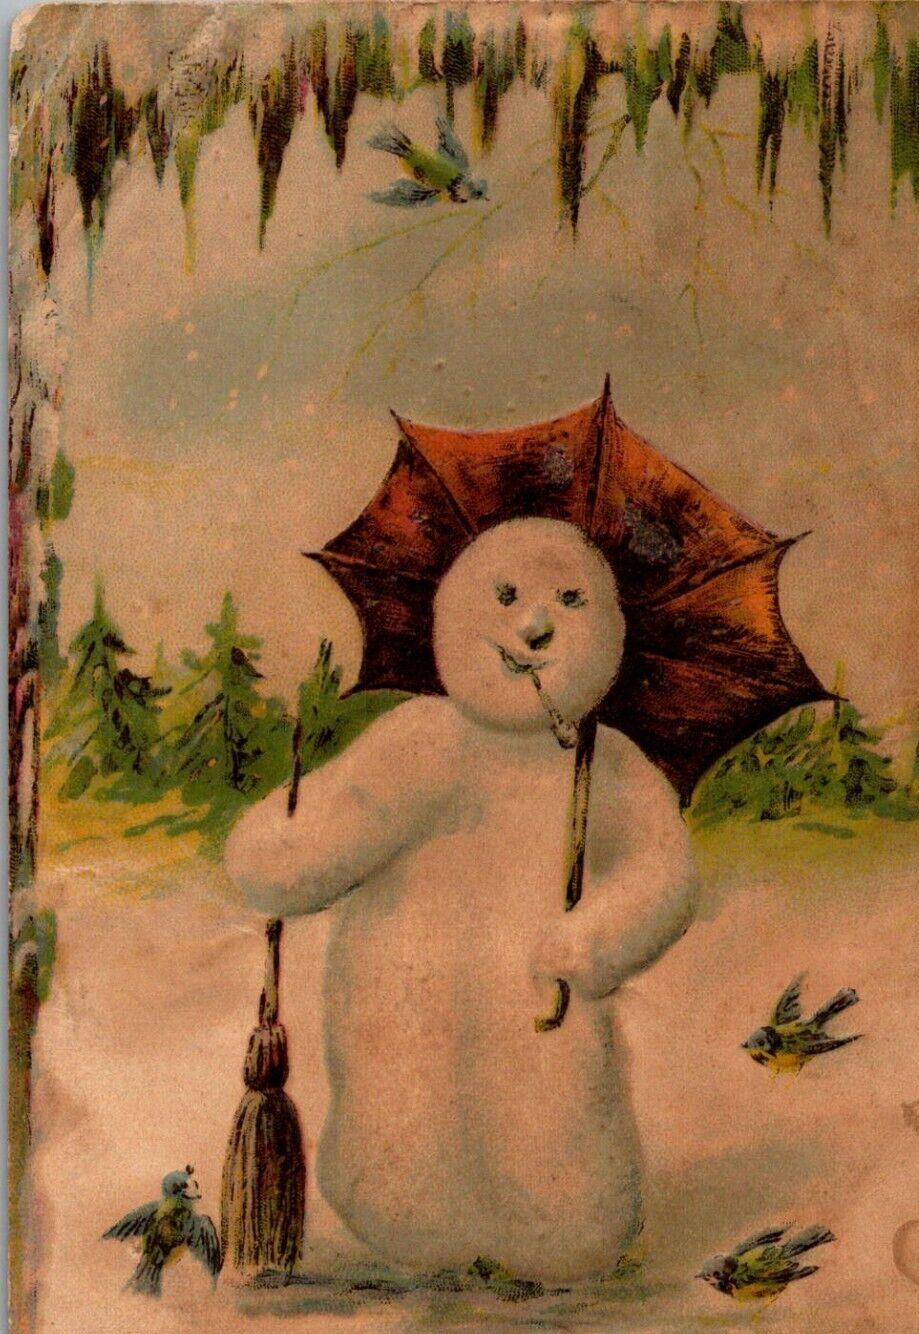 1903 GERMAN New Year Postcard Snowman Smokes Pipe Under Parasol Icicle Border